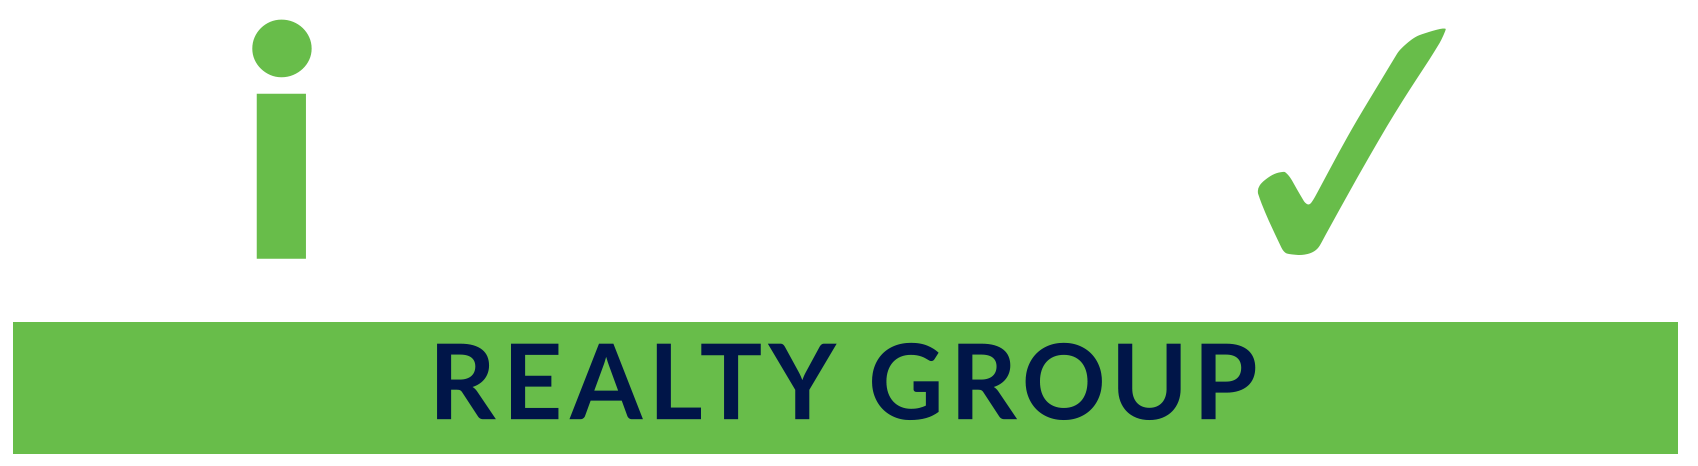 iSelect Realty